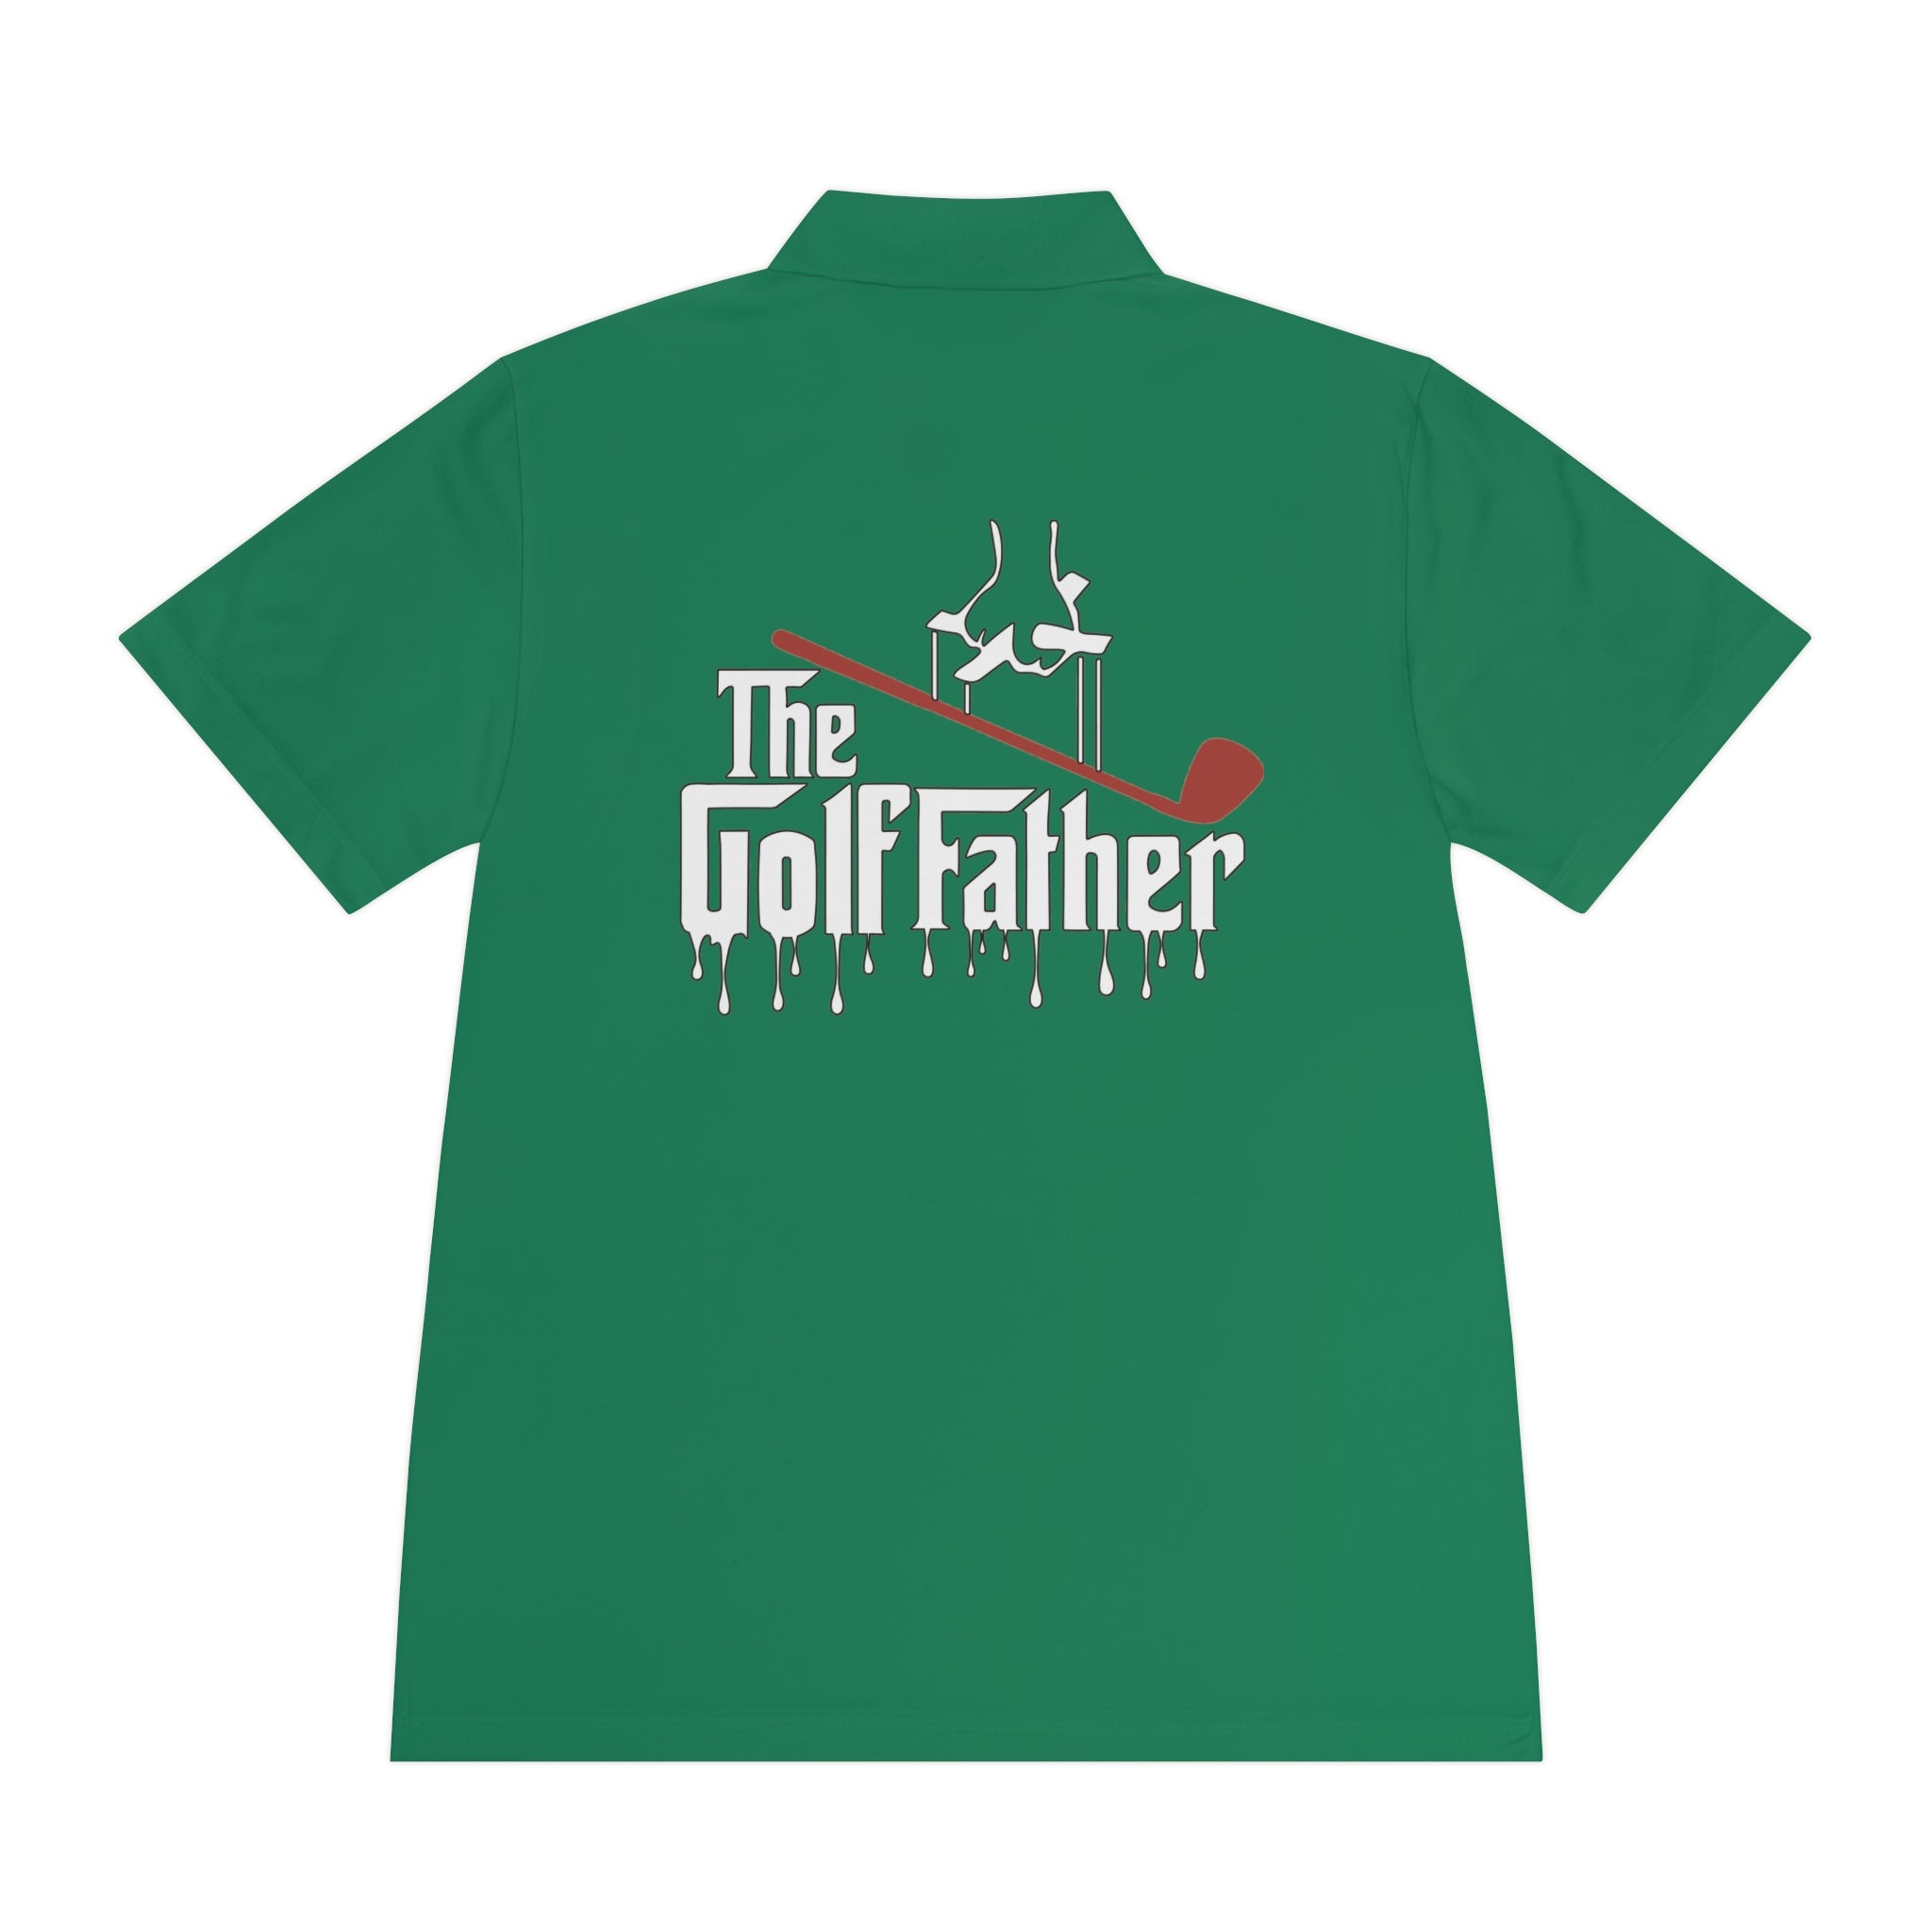 The Golf Father - Mulligan Masters